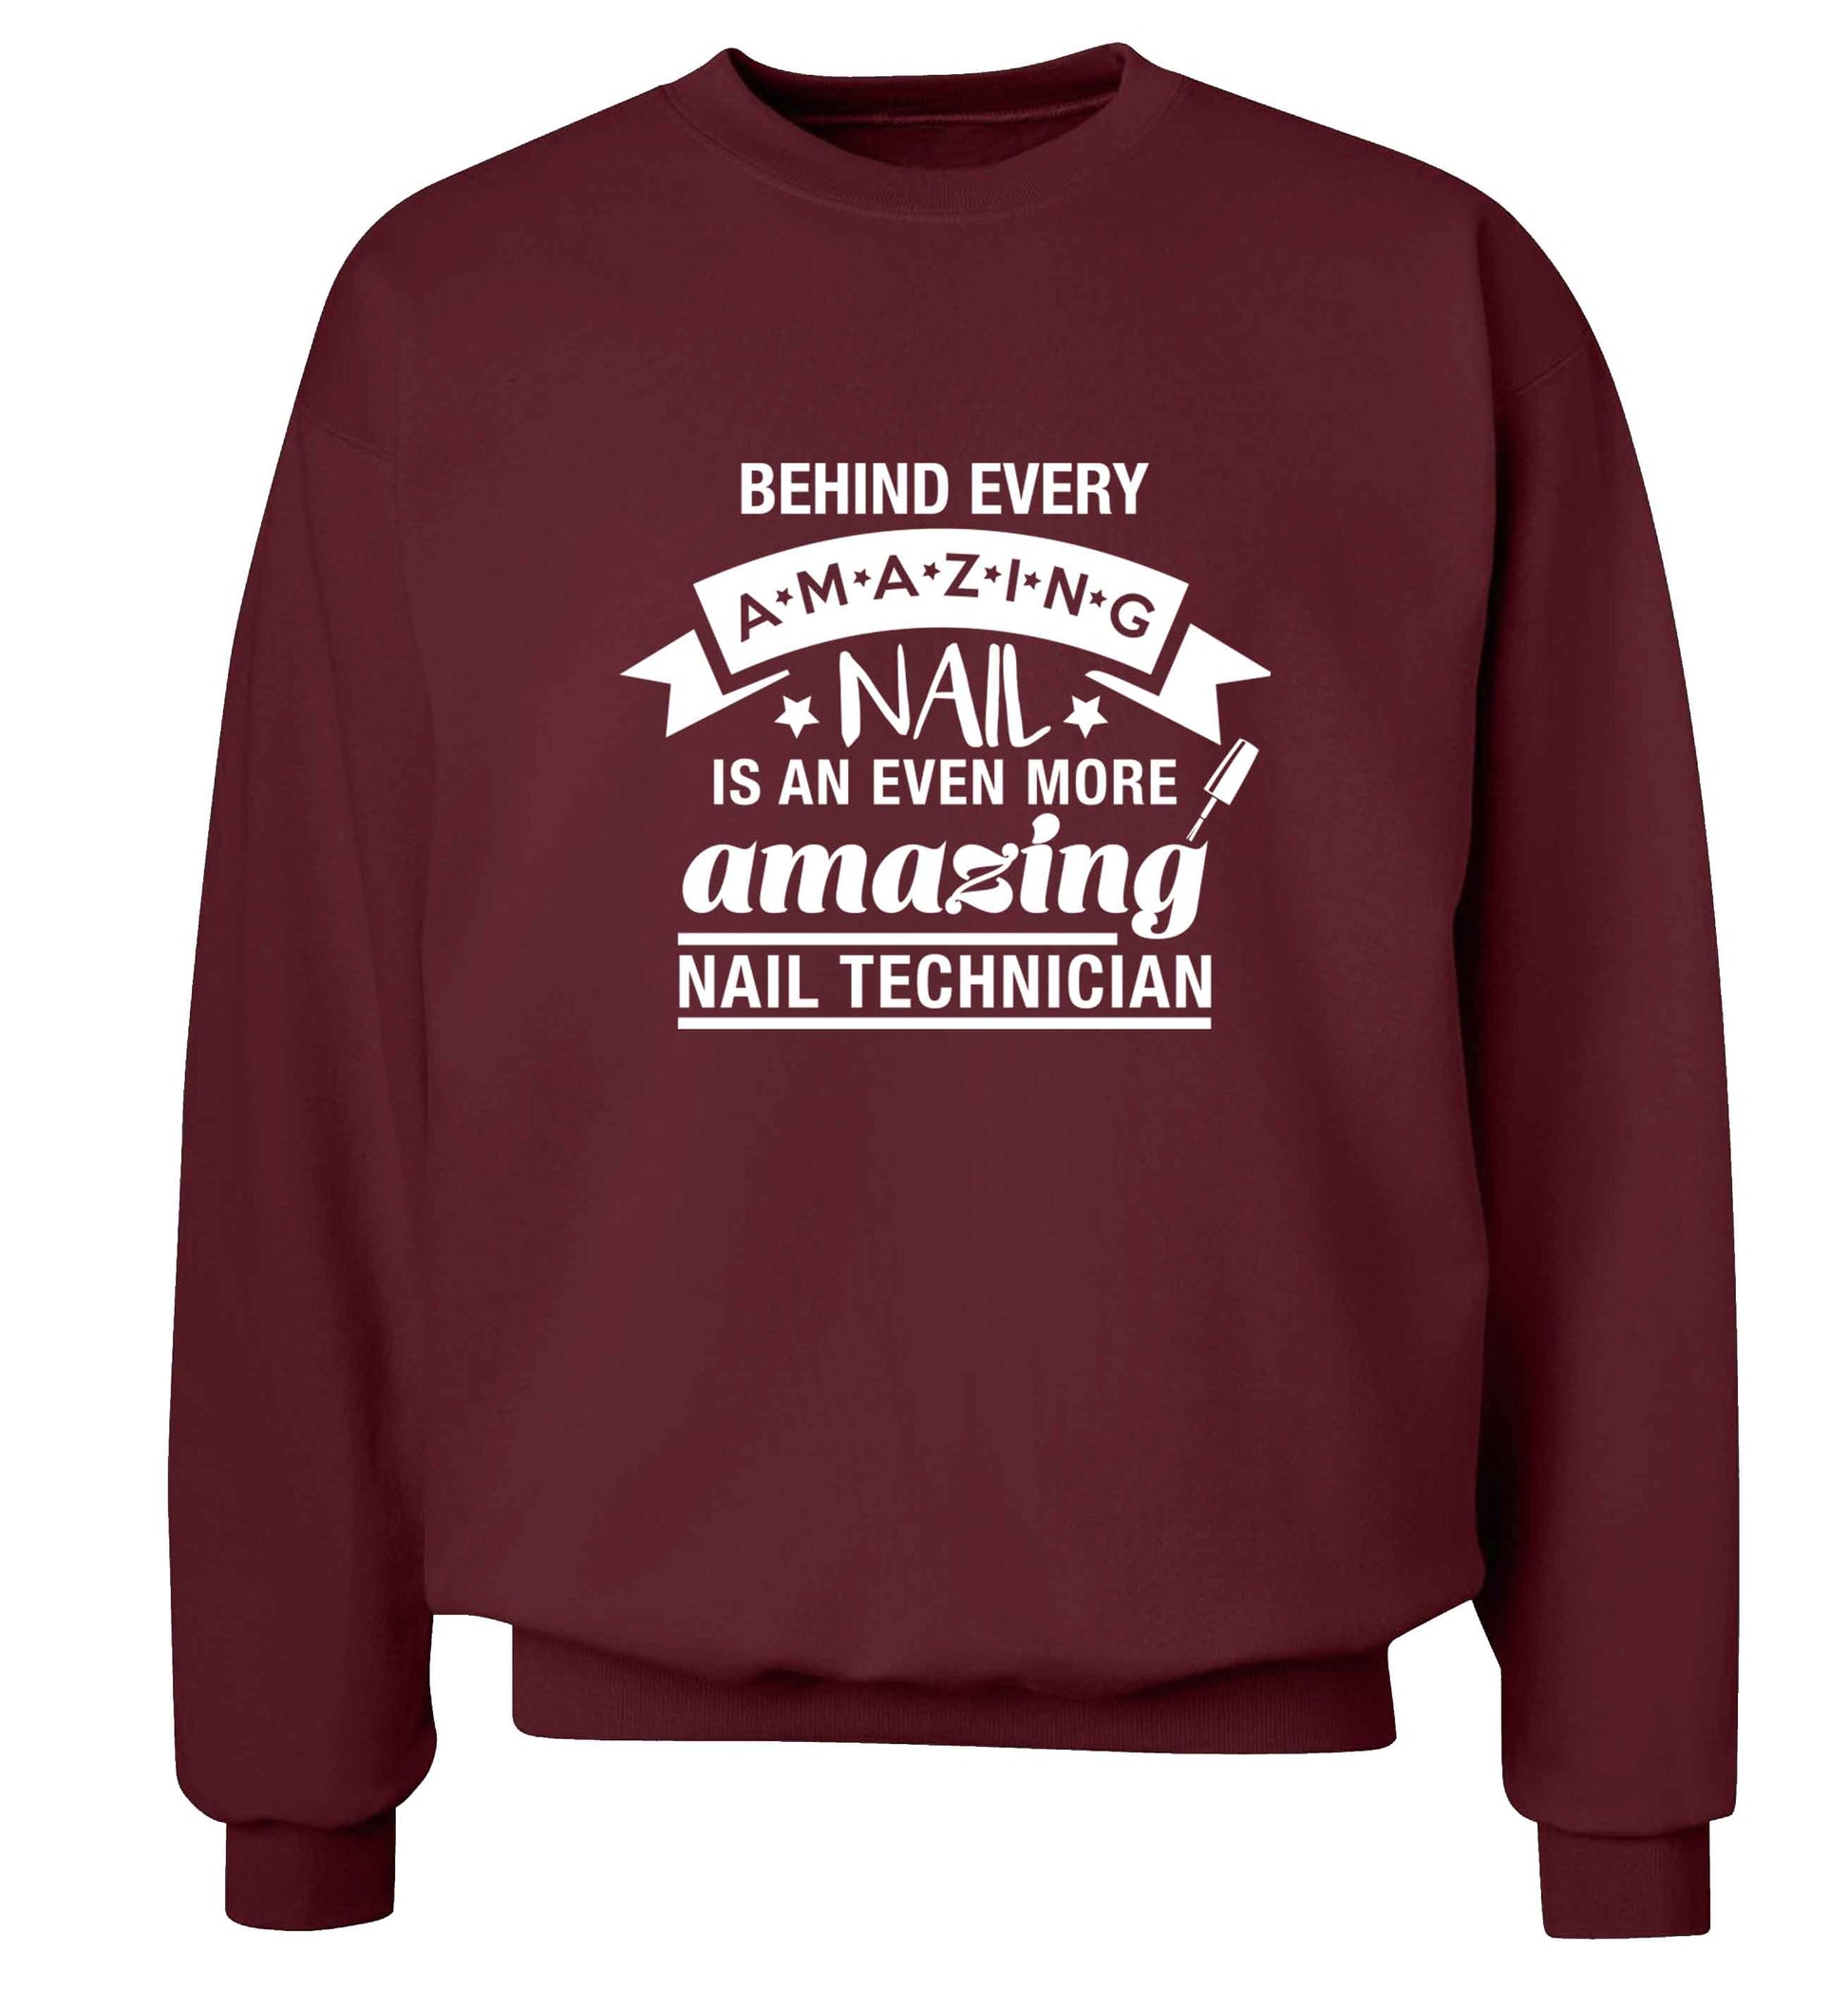 Behind every amazing nail is an even more amazing nail technician adult's unisex maroon sweater 2XL